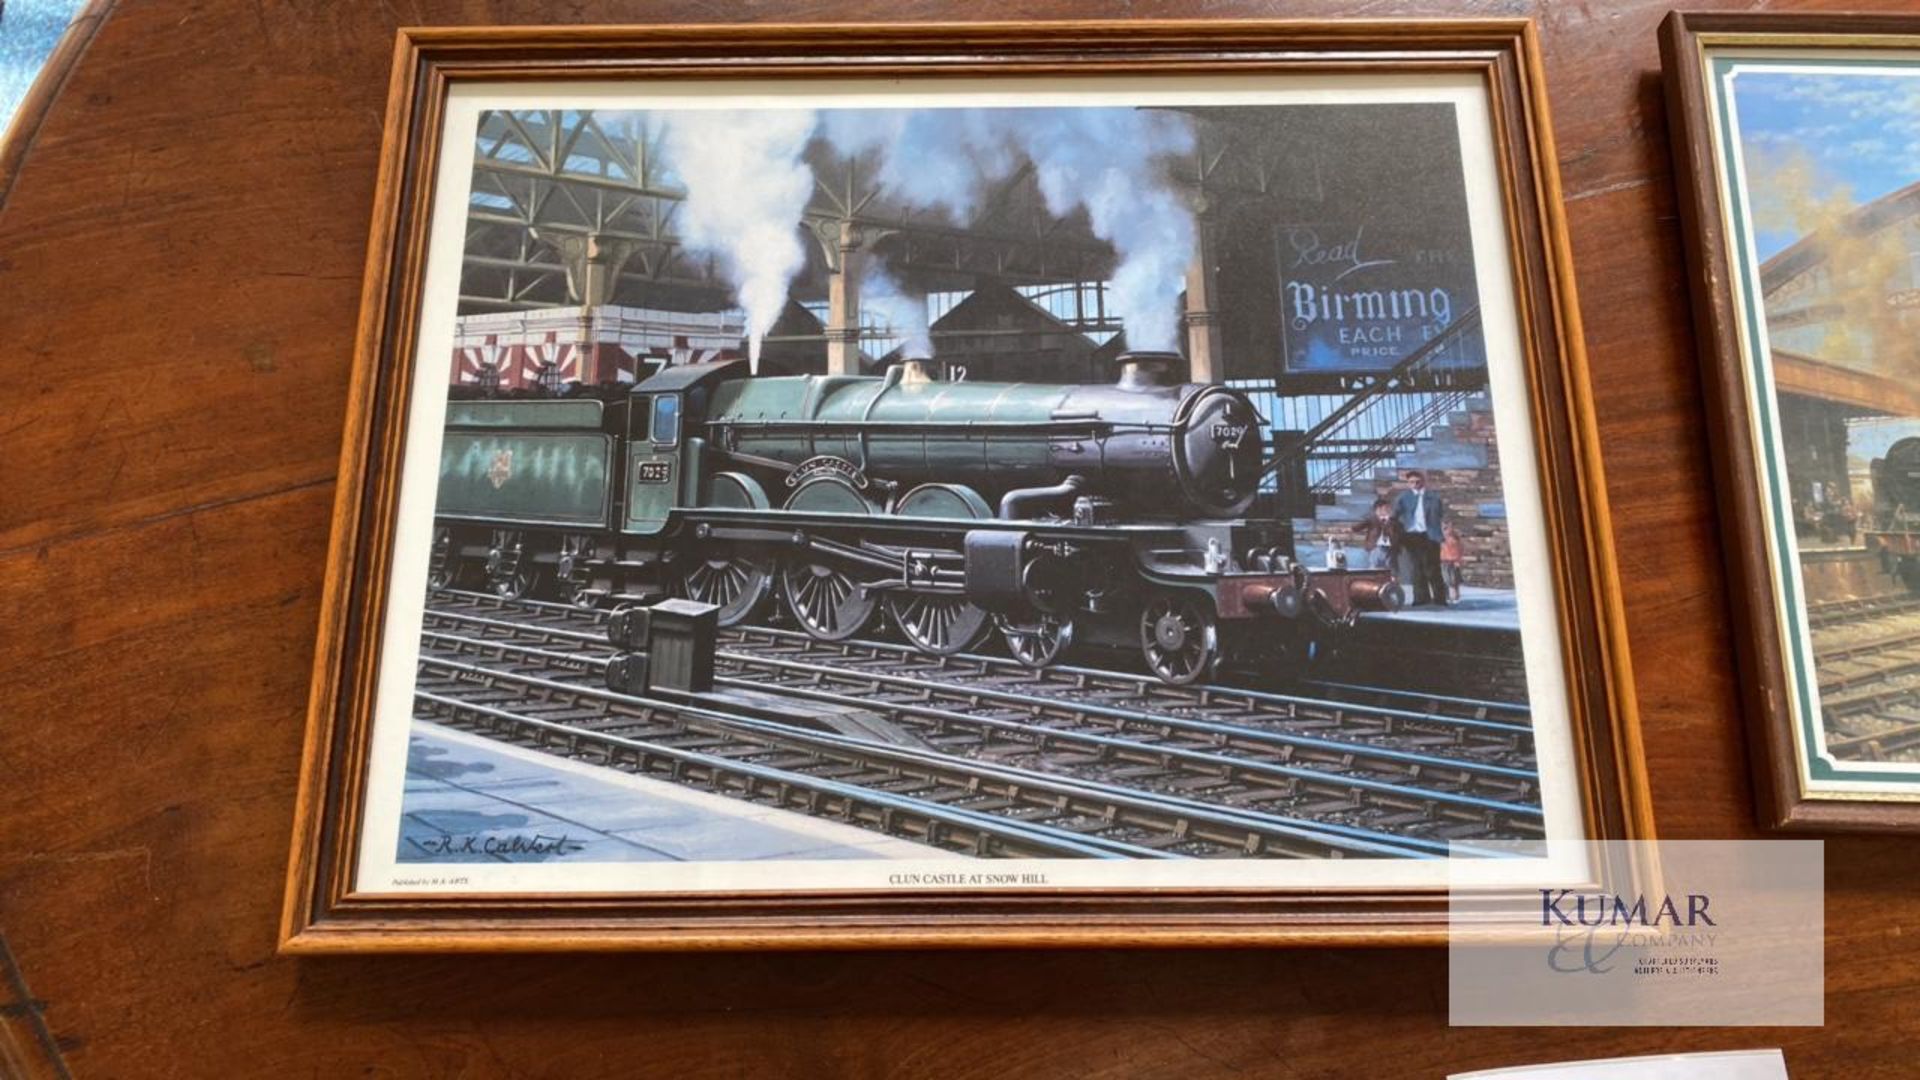 Train pictures in frames - Image 5 of 18